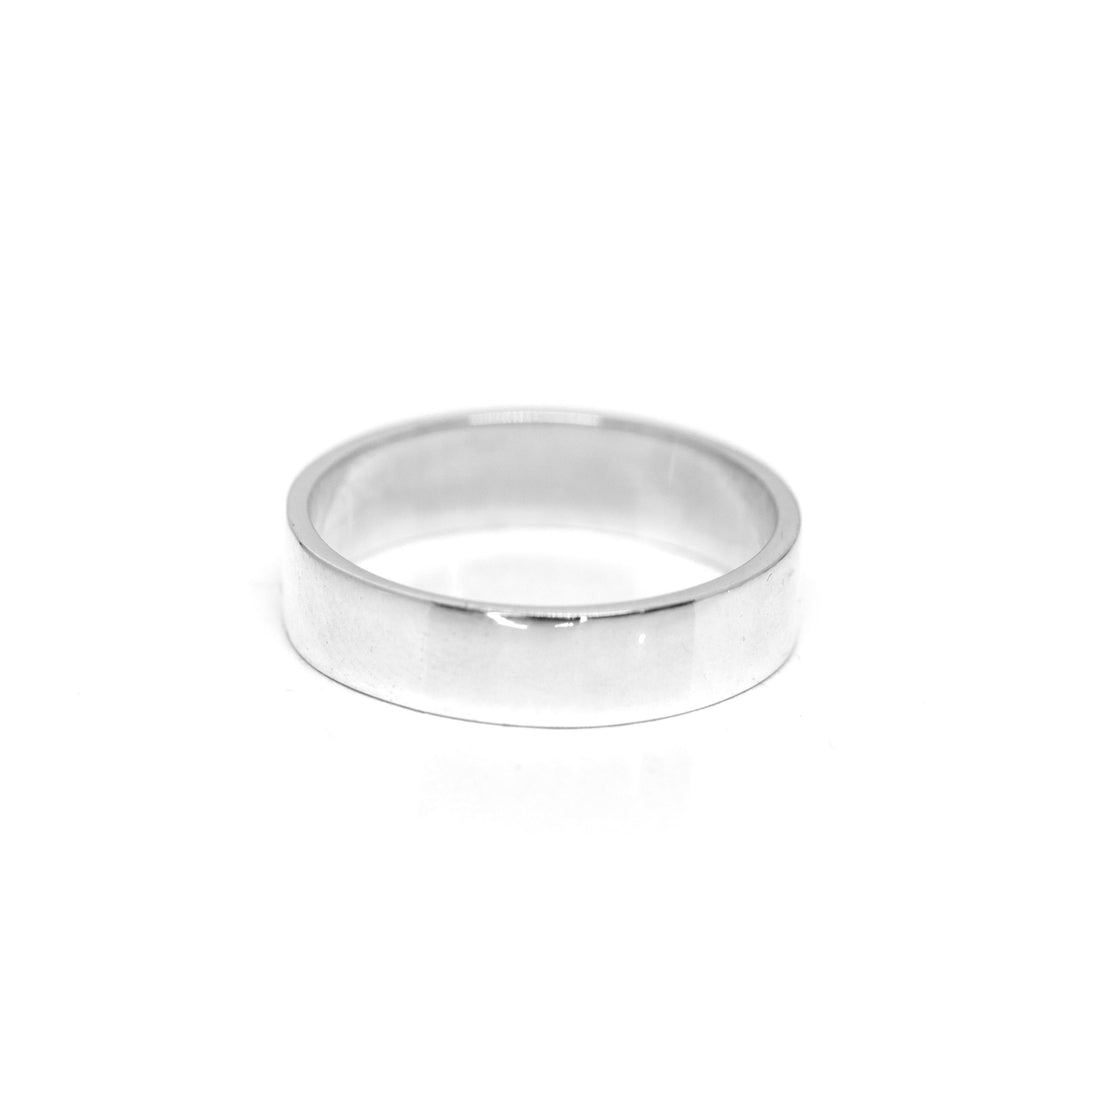 white gold men wedding band custom made jewellry montreal by bena jewelry designer on a white background